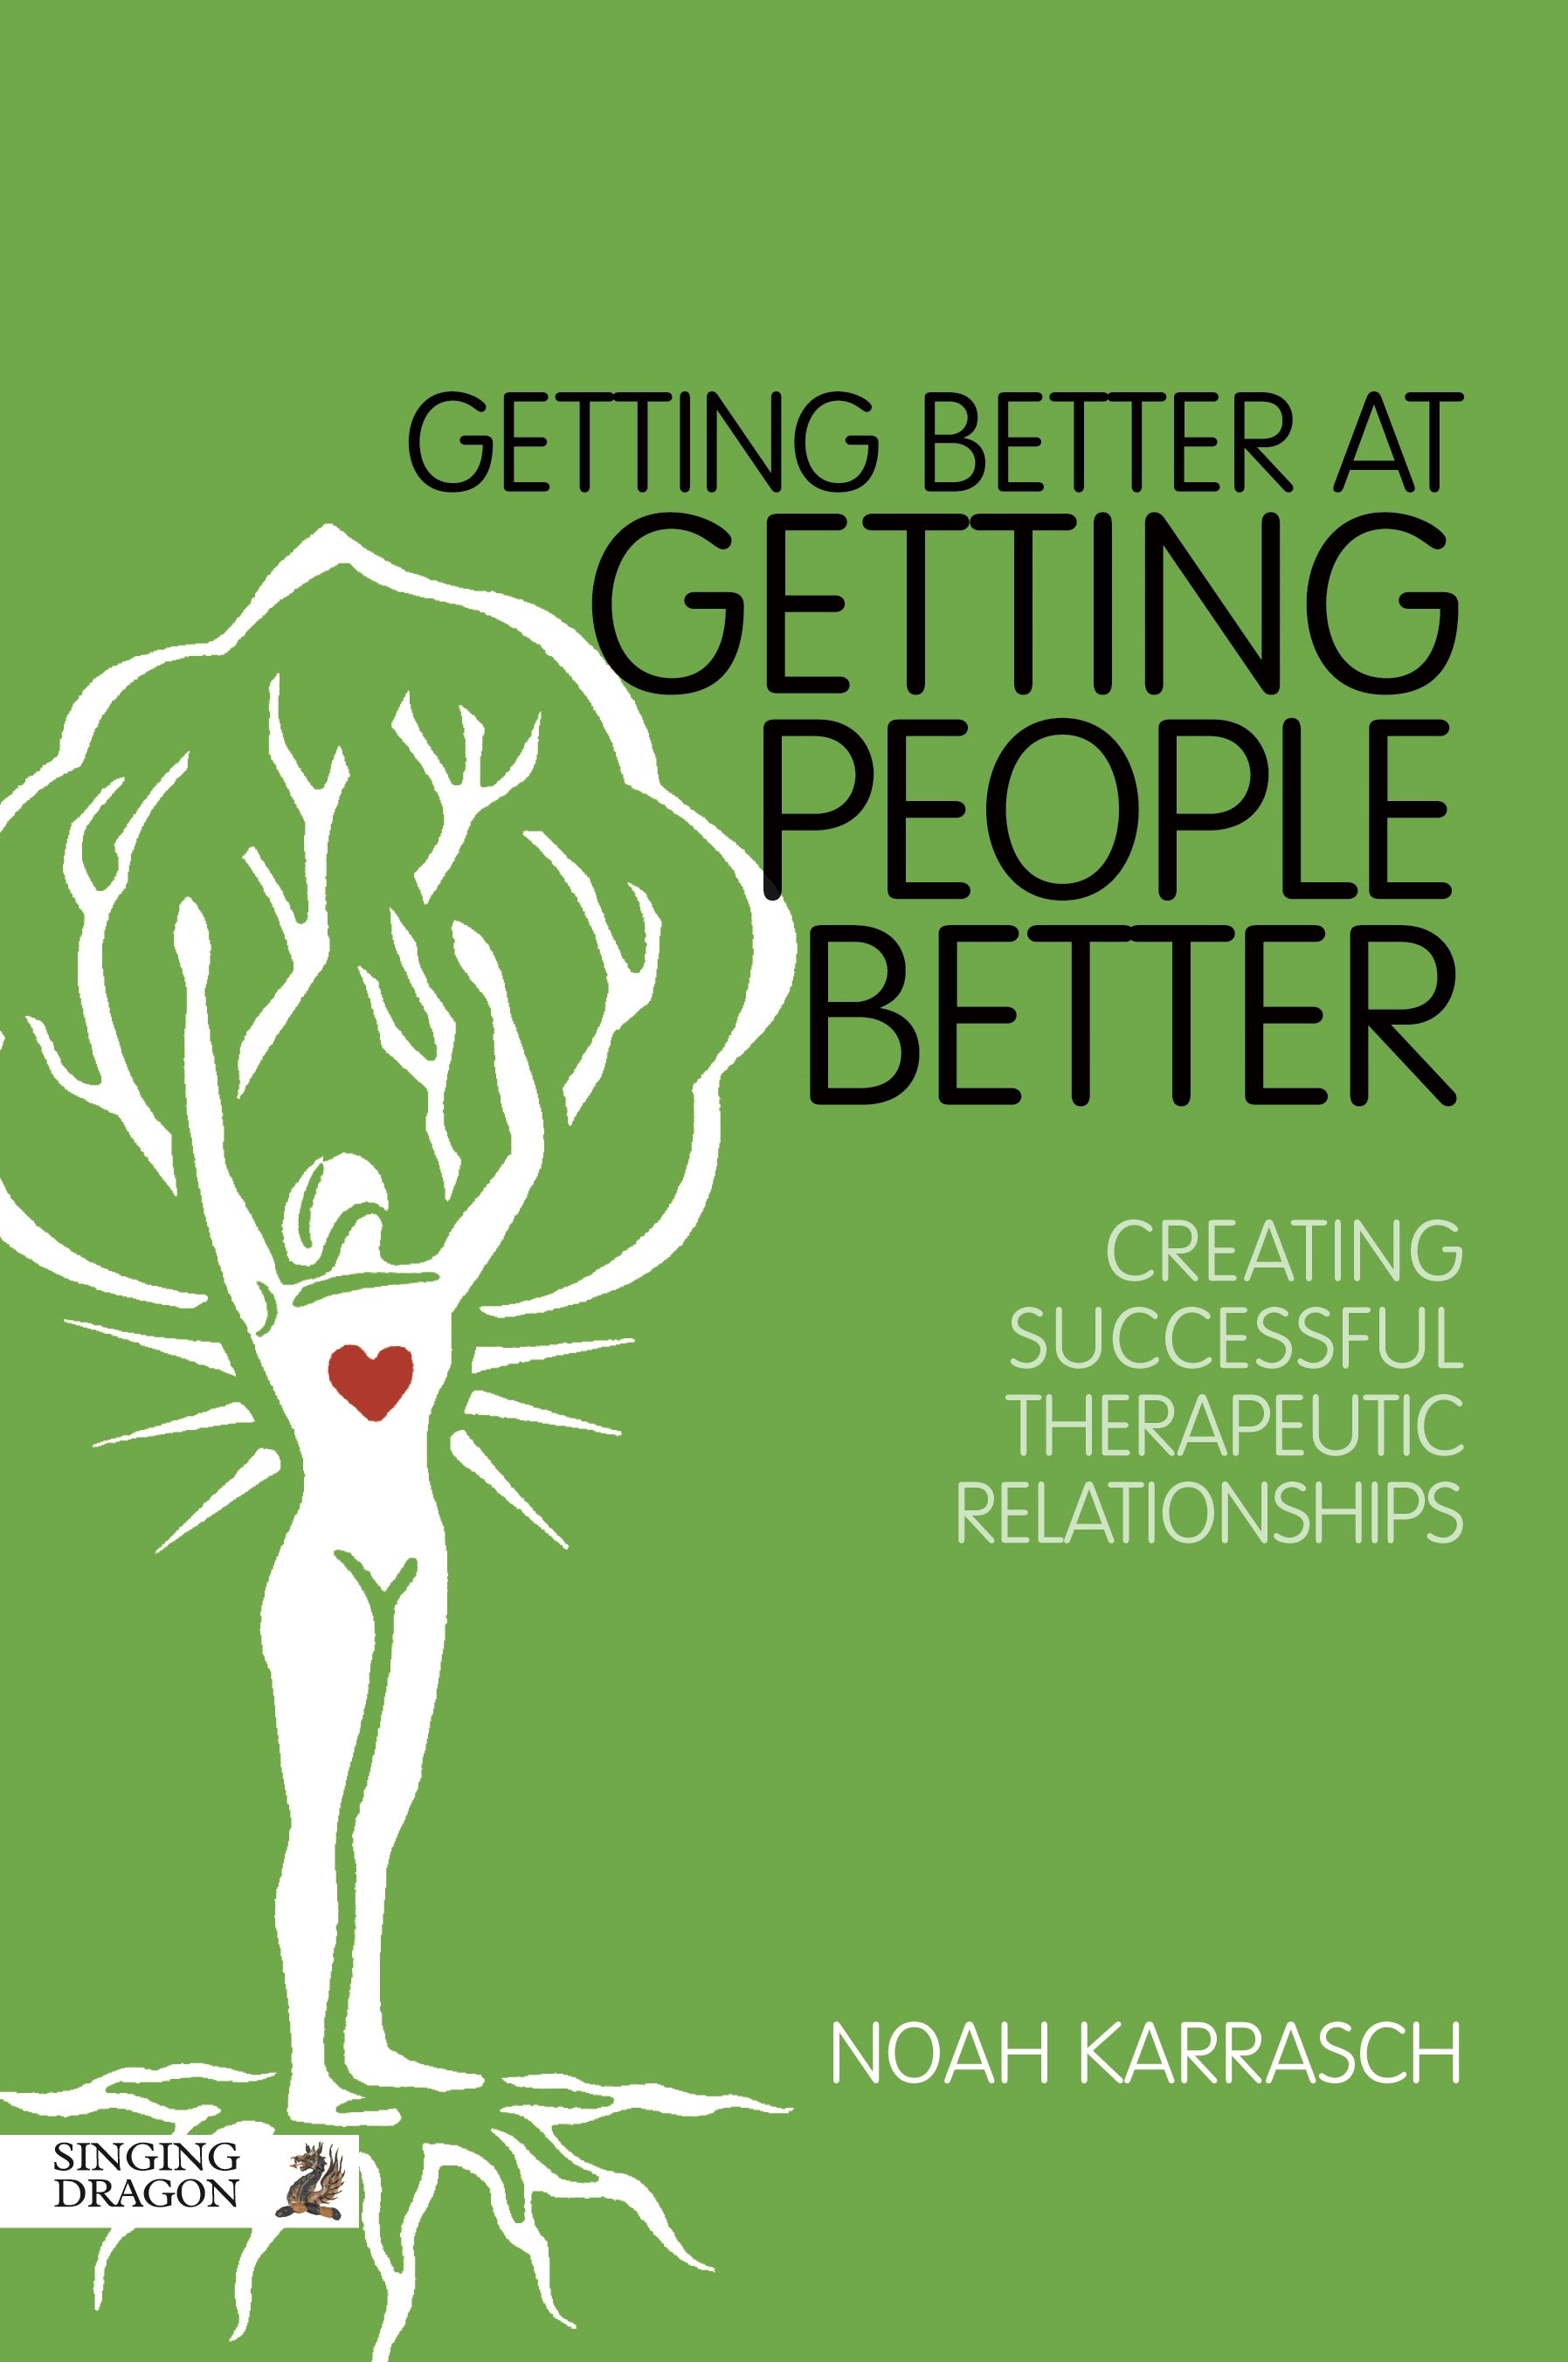 Getting Better at Getting People Better by Noah Karrasch